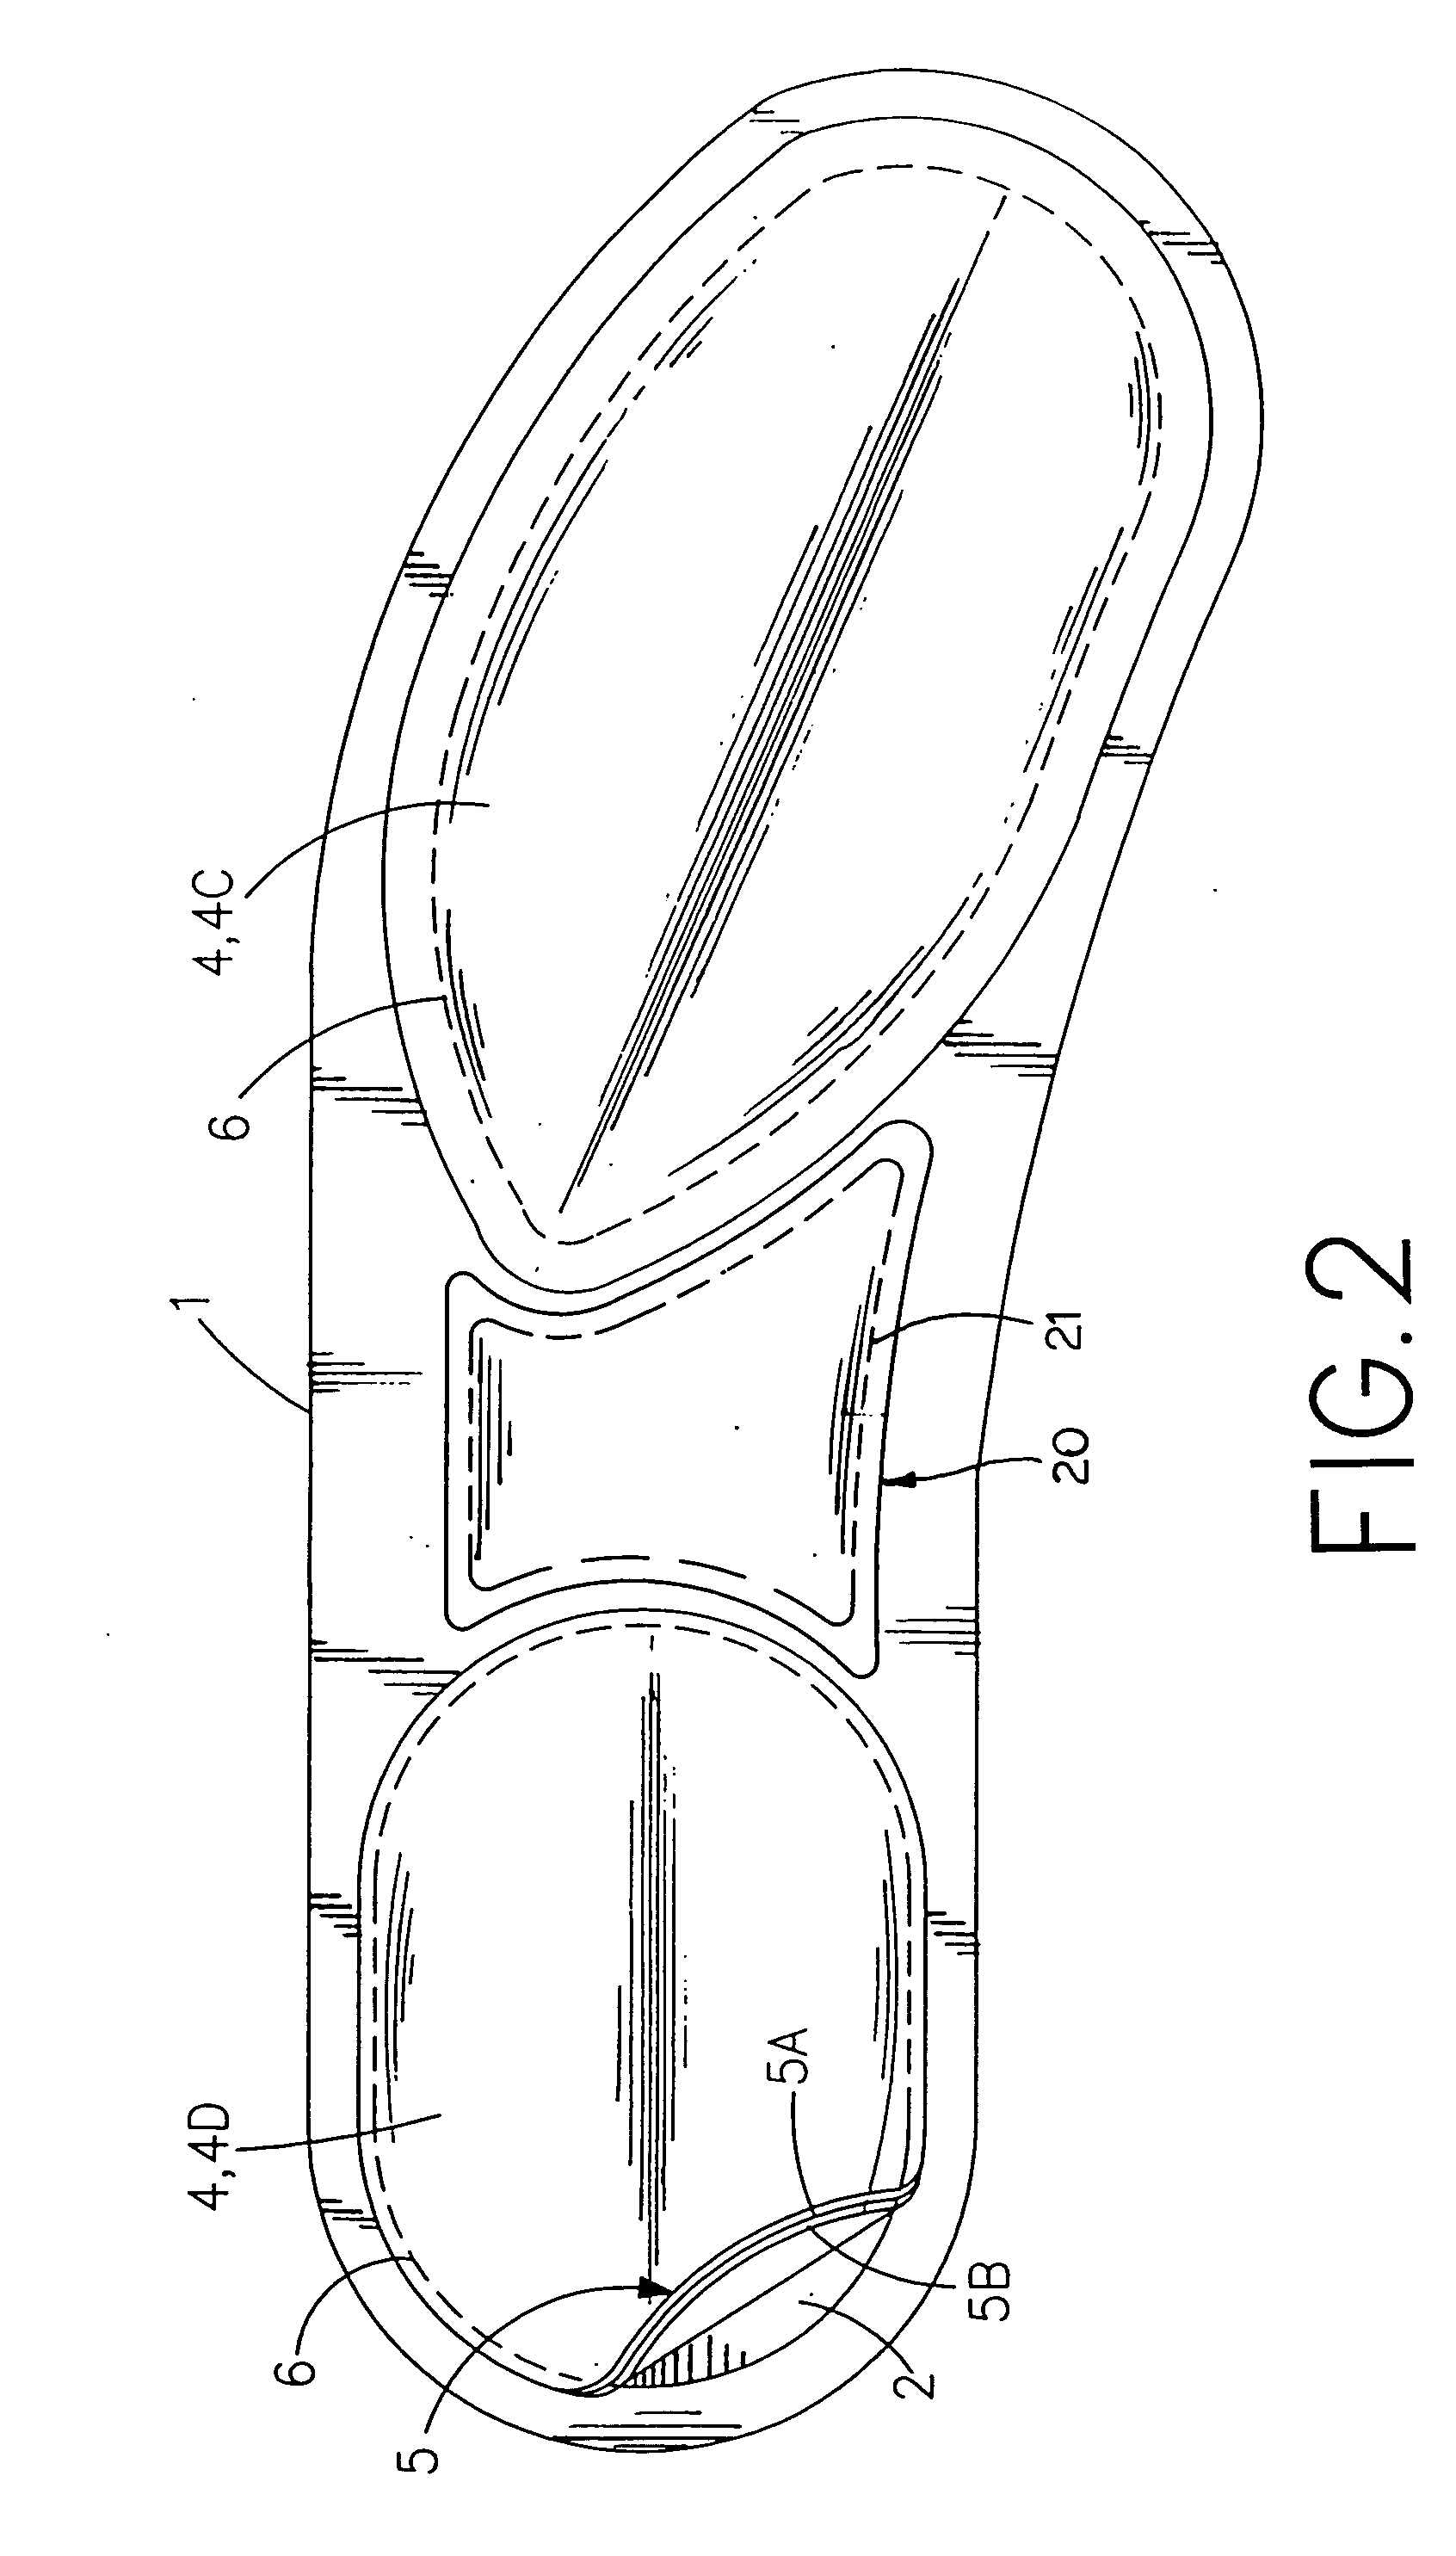 Therapeutic shoe sole design, method for manufacturing the same, and products constructed therefrom